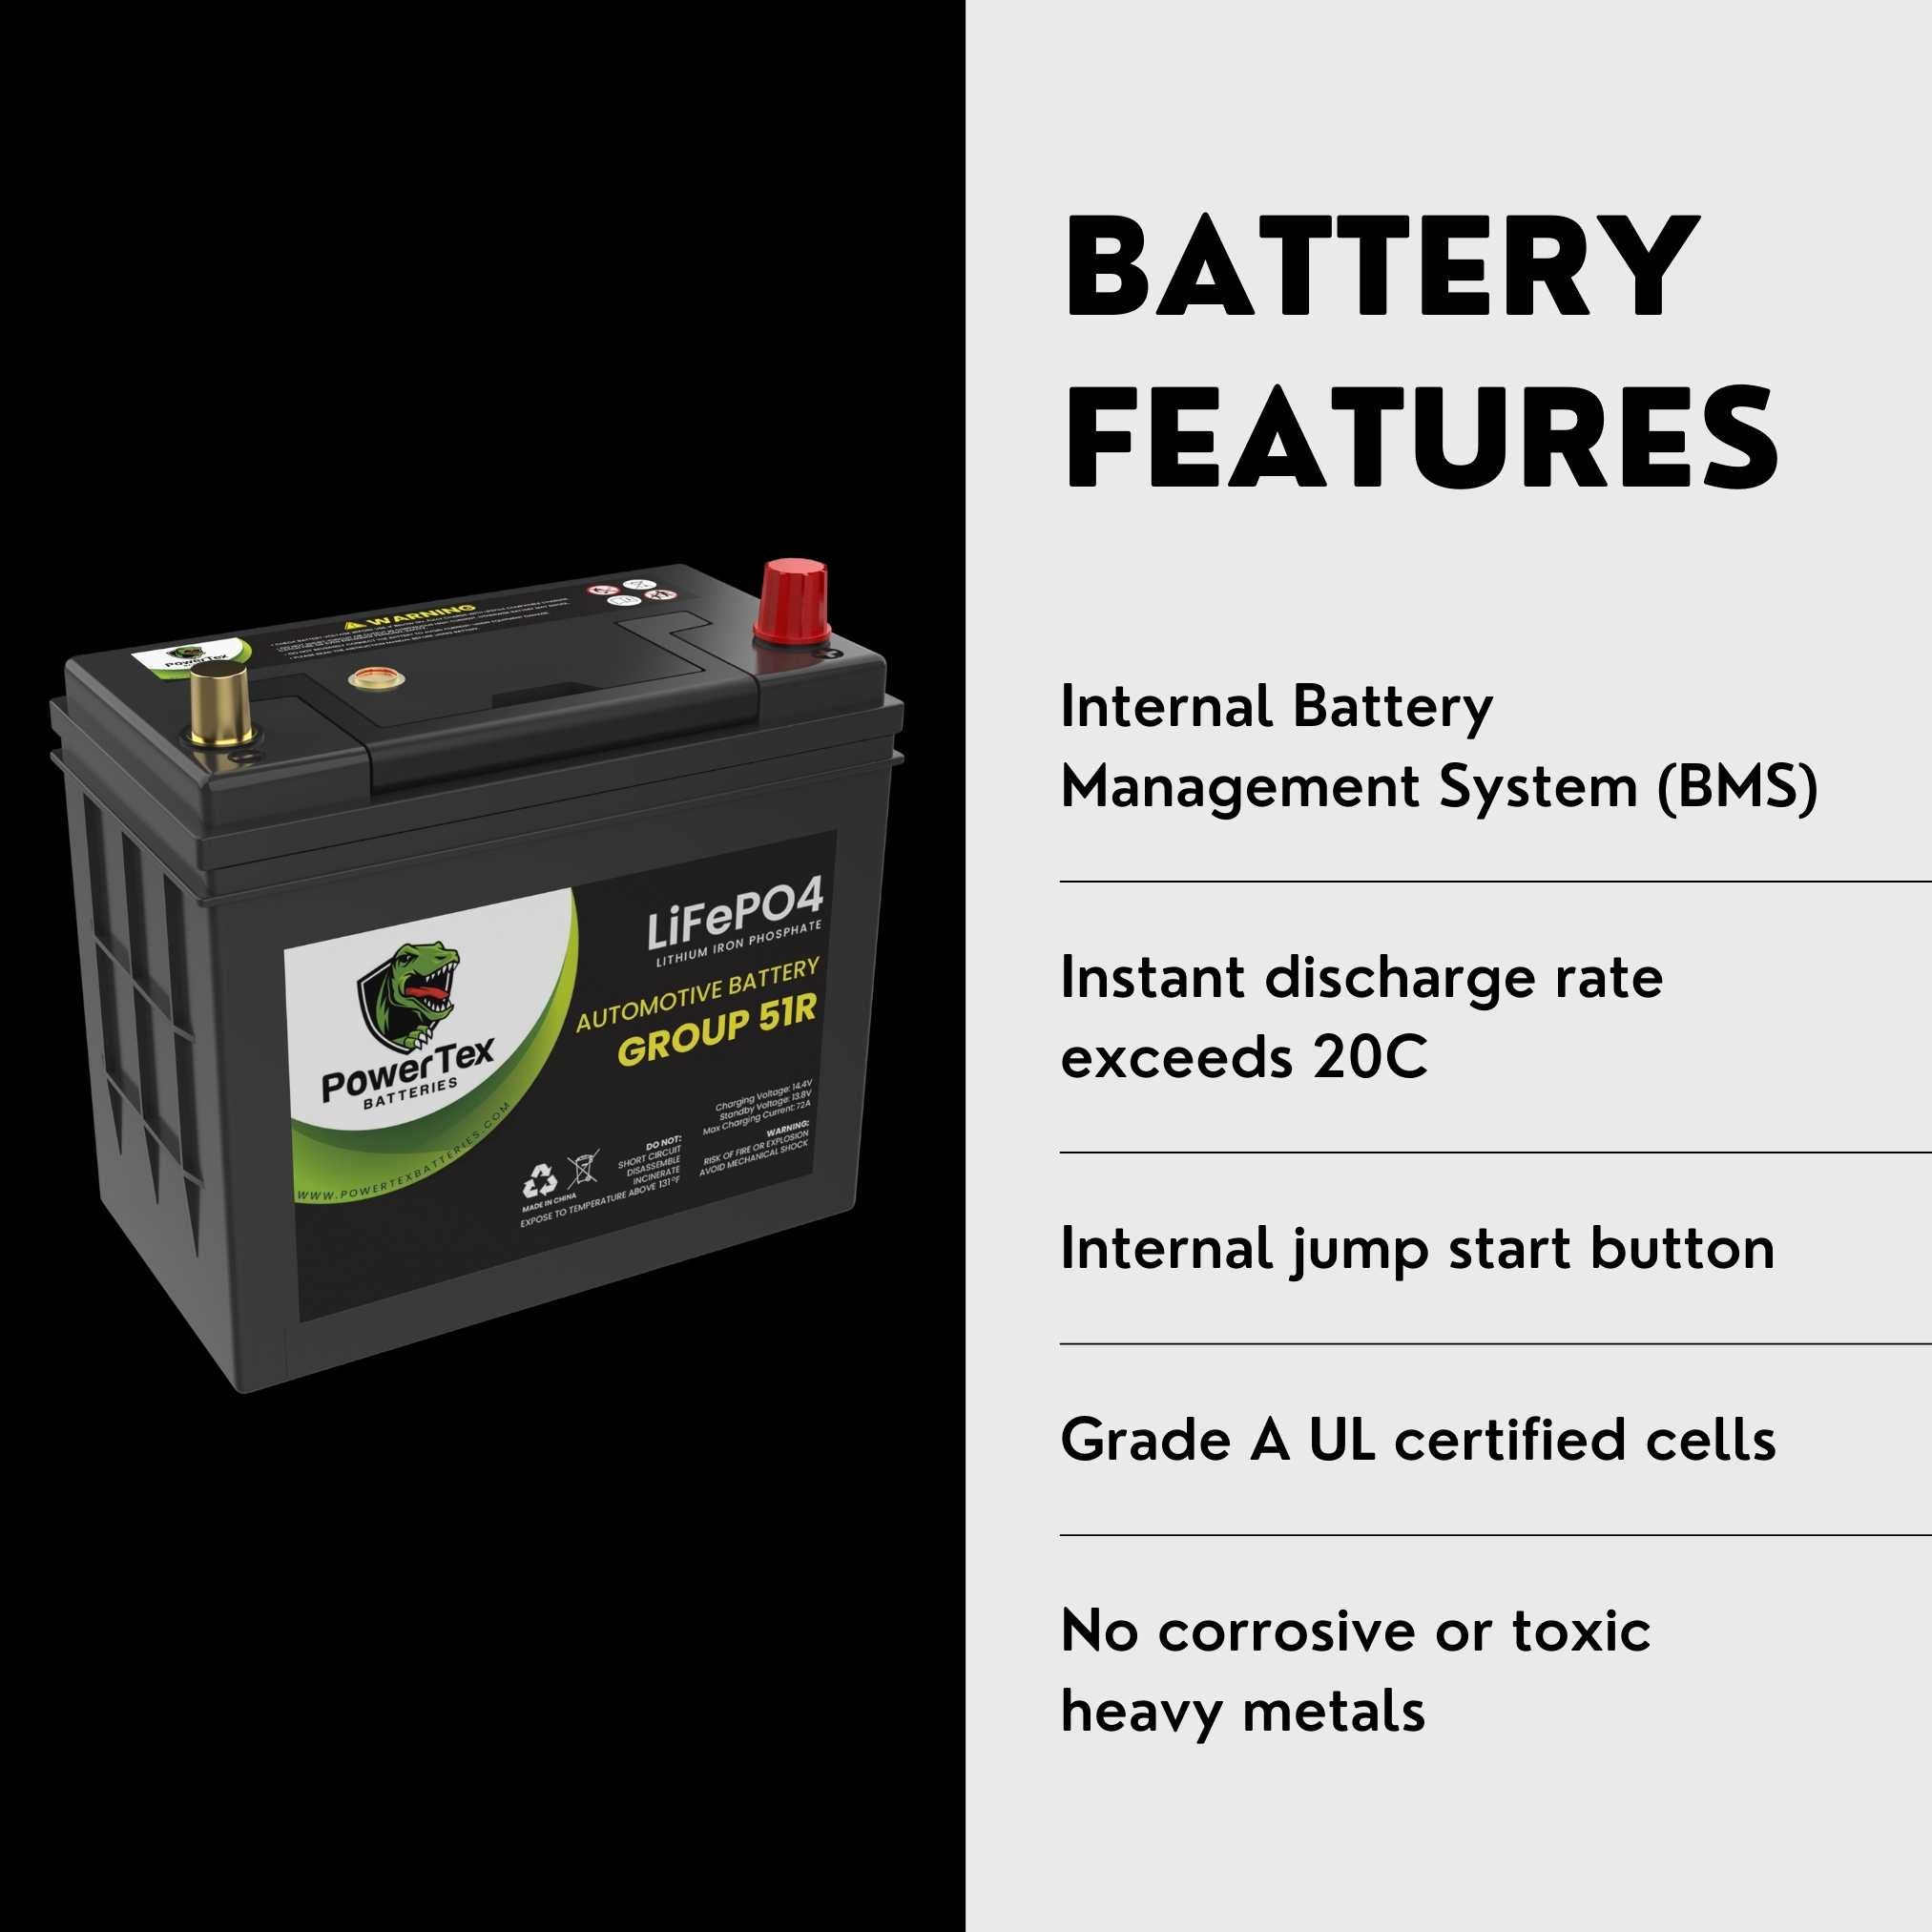 2013 Nissan GT-R Car Battery BCI Group 51R Lithium LiFePO4 Automotive Battery